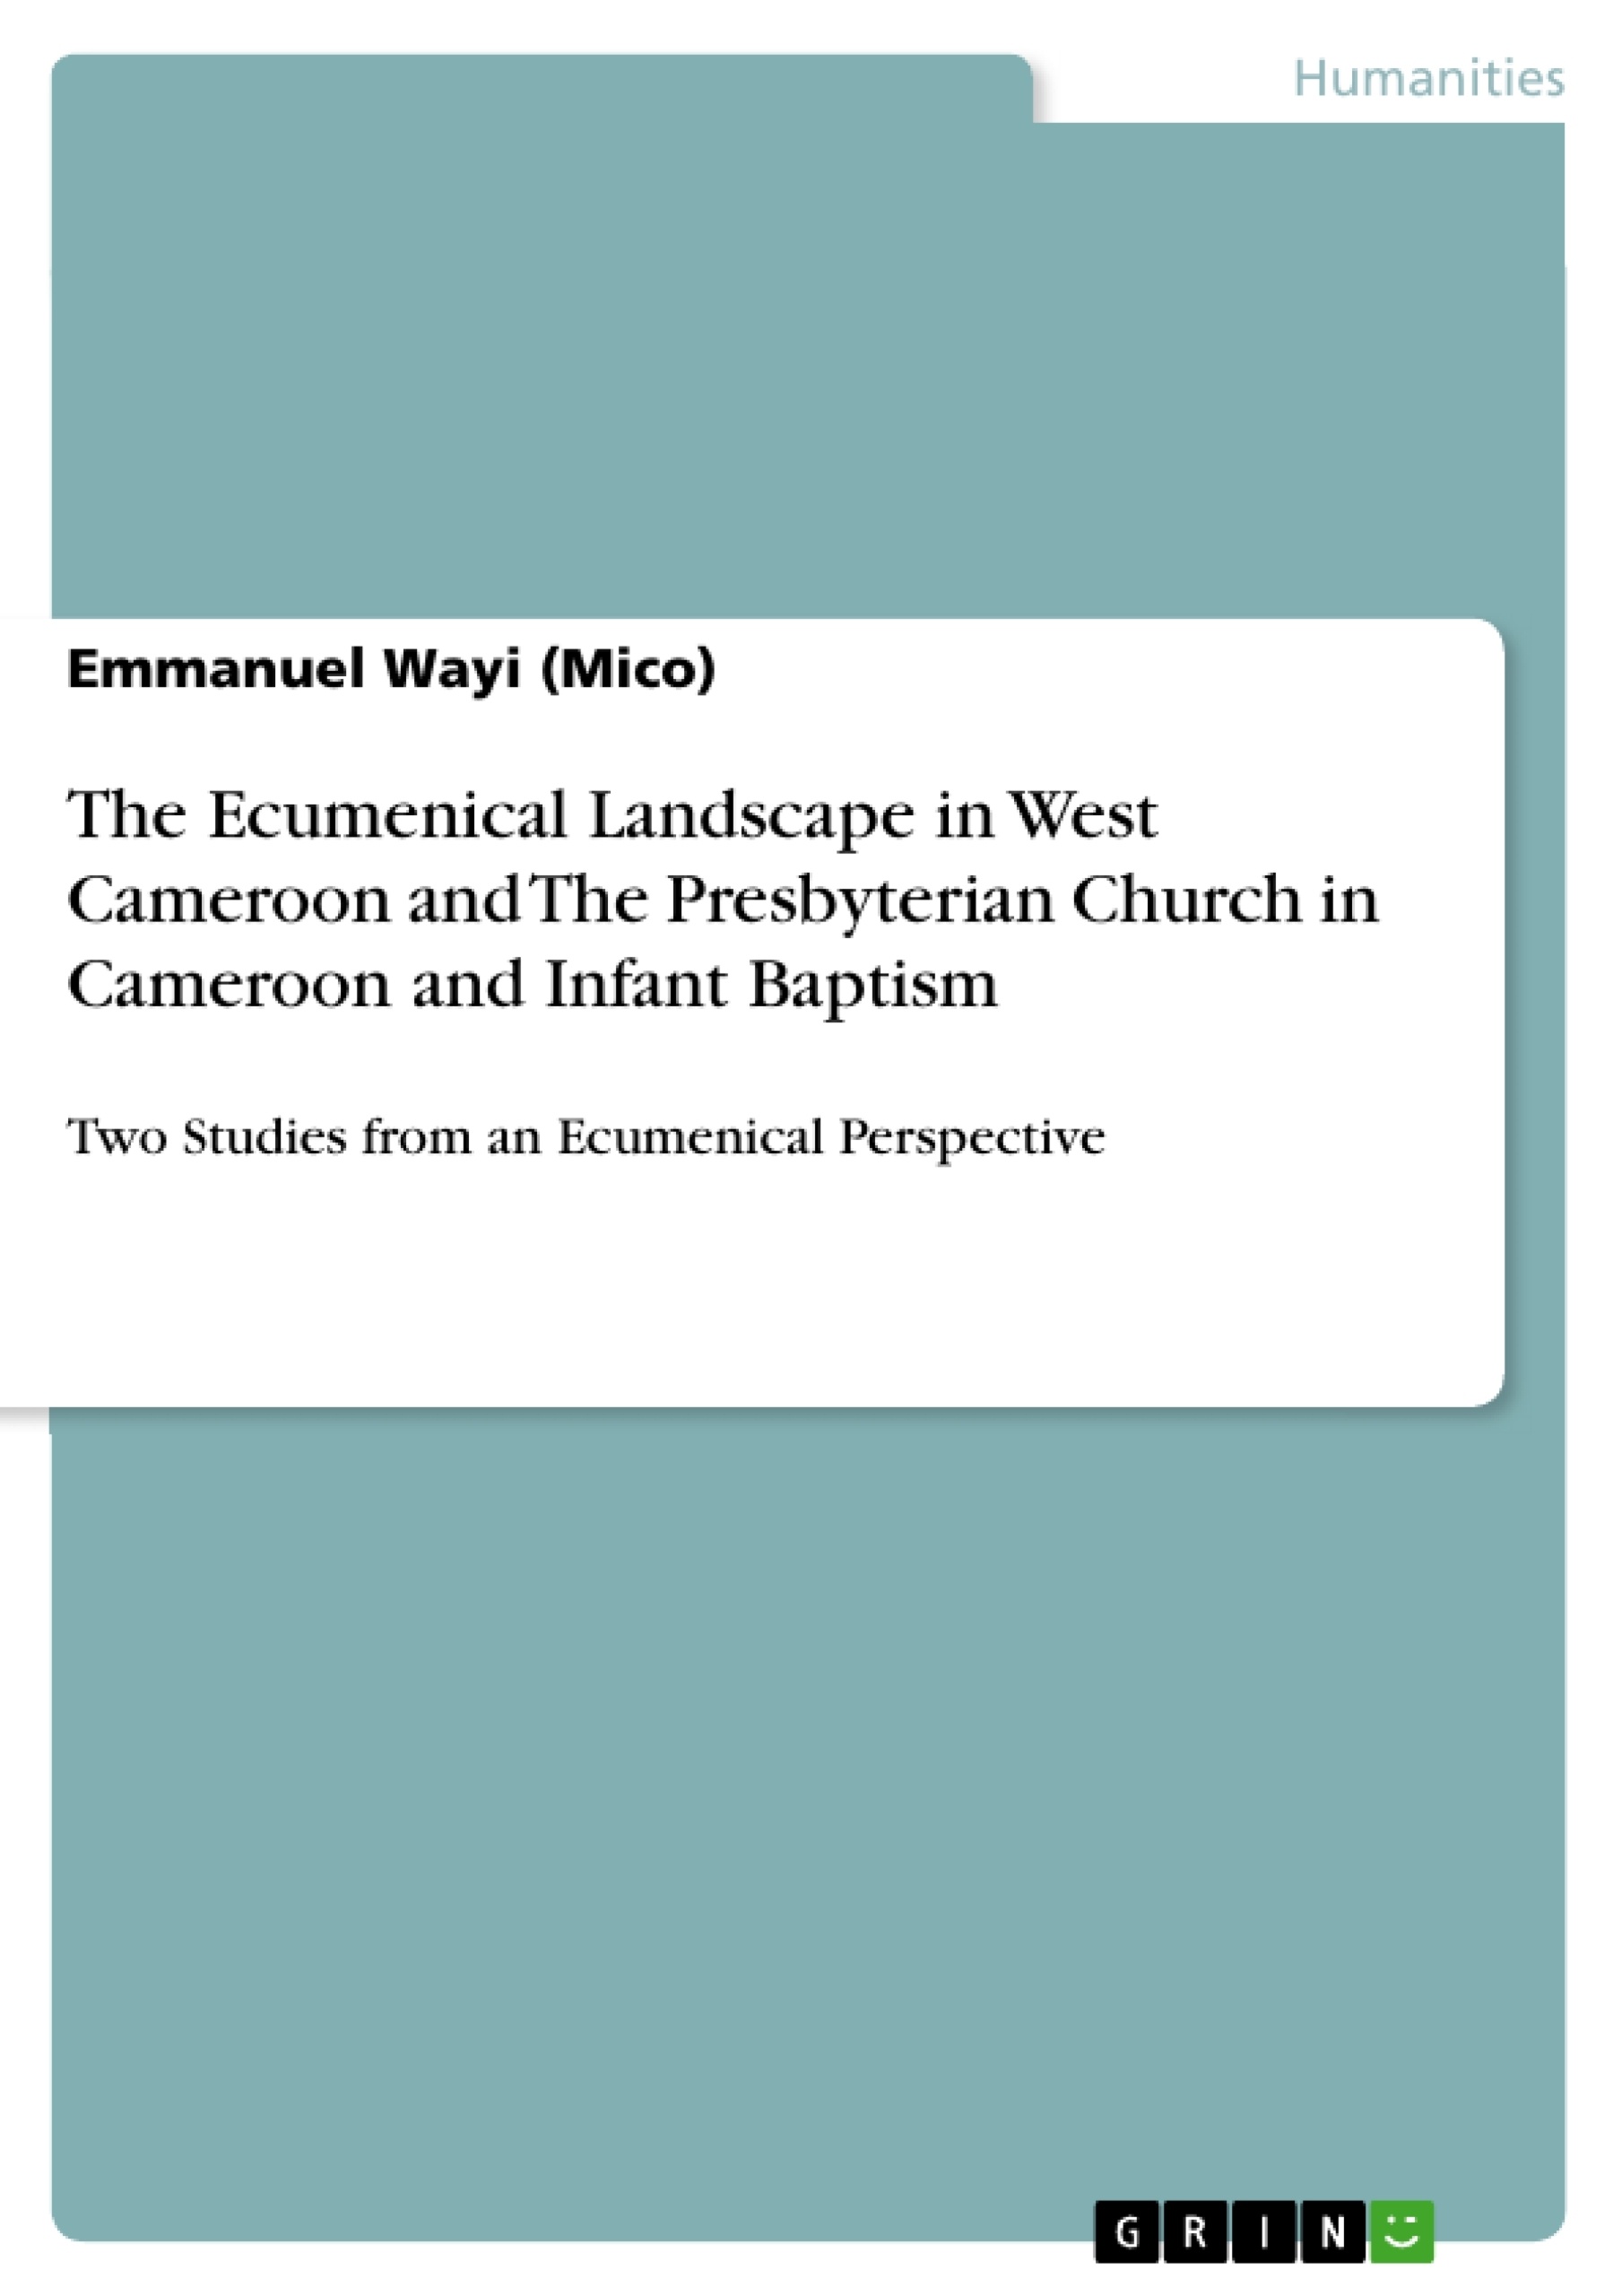 Título: The Ecumenical Landscape in West Cameroon and The Presbyterian Church in Cameroon and Infant Baptism